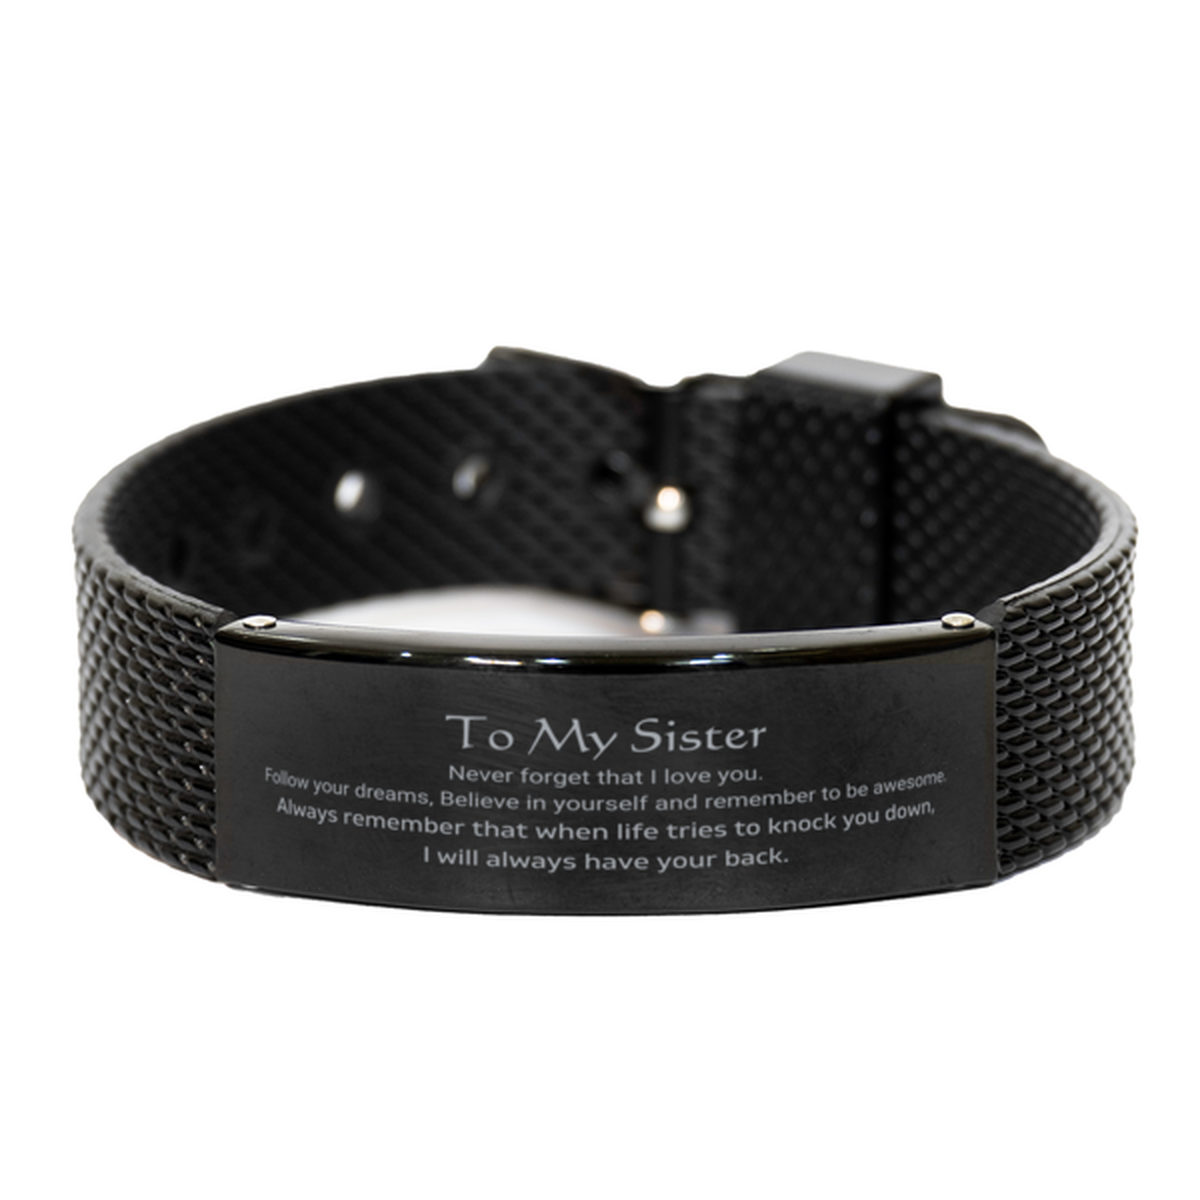 Inspirational Gifts for Sister, Follow your dreams, Believe in yourself, Sister Black Shark Mesh Bracelet, Birthday Christmas Unique Gifts For Sister